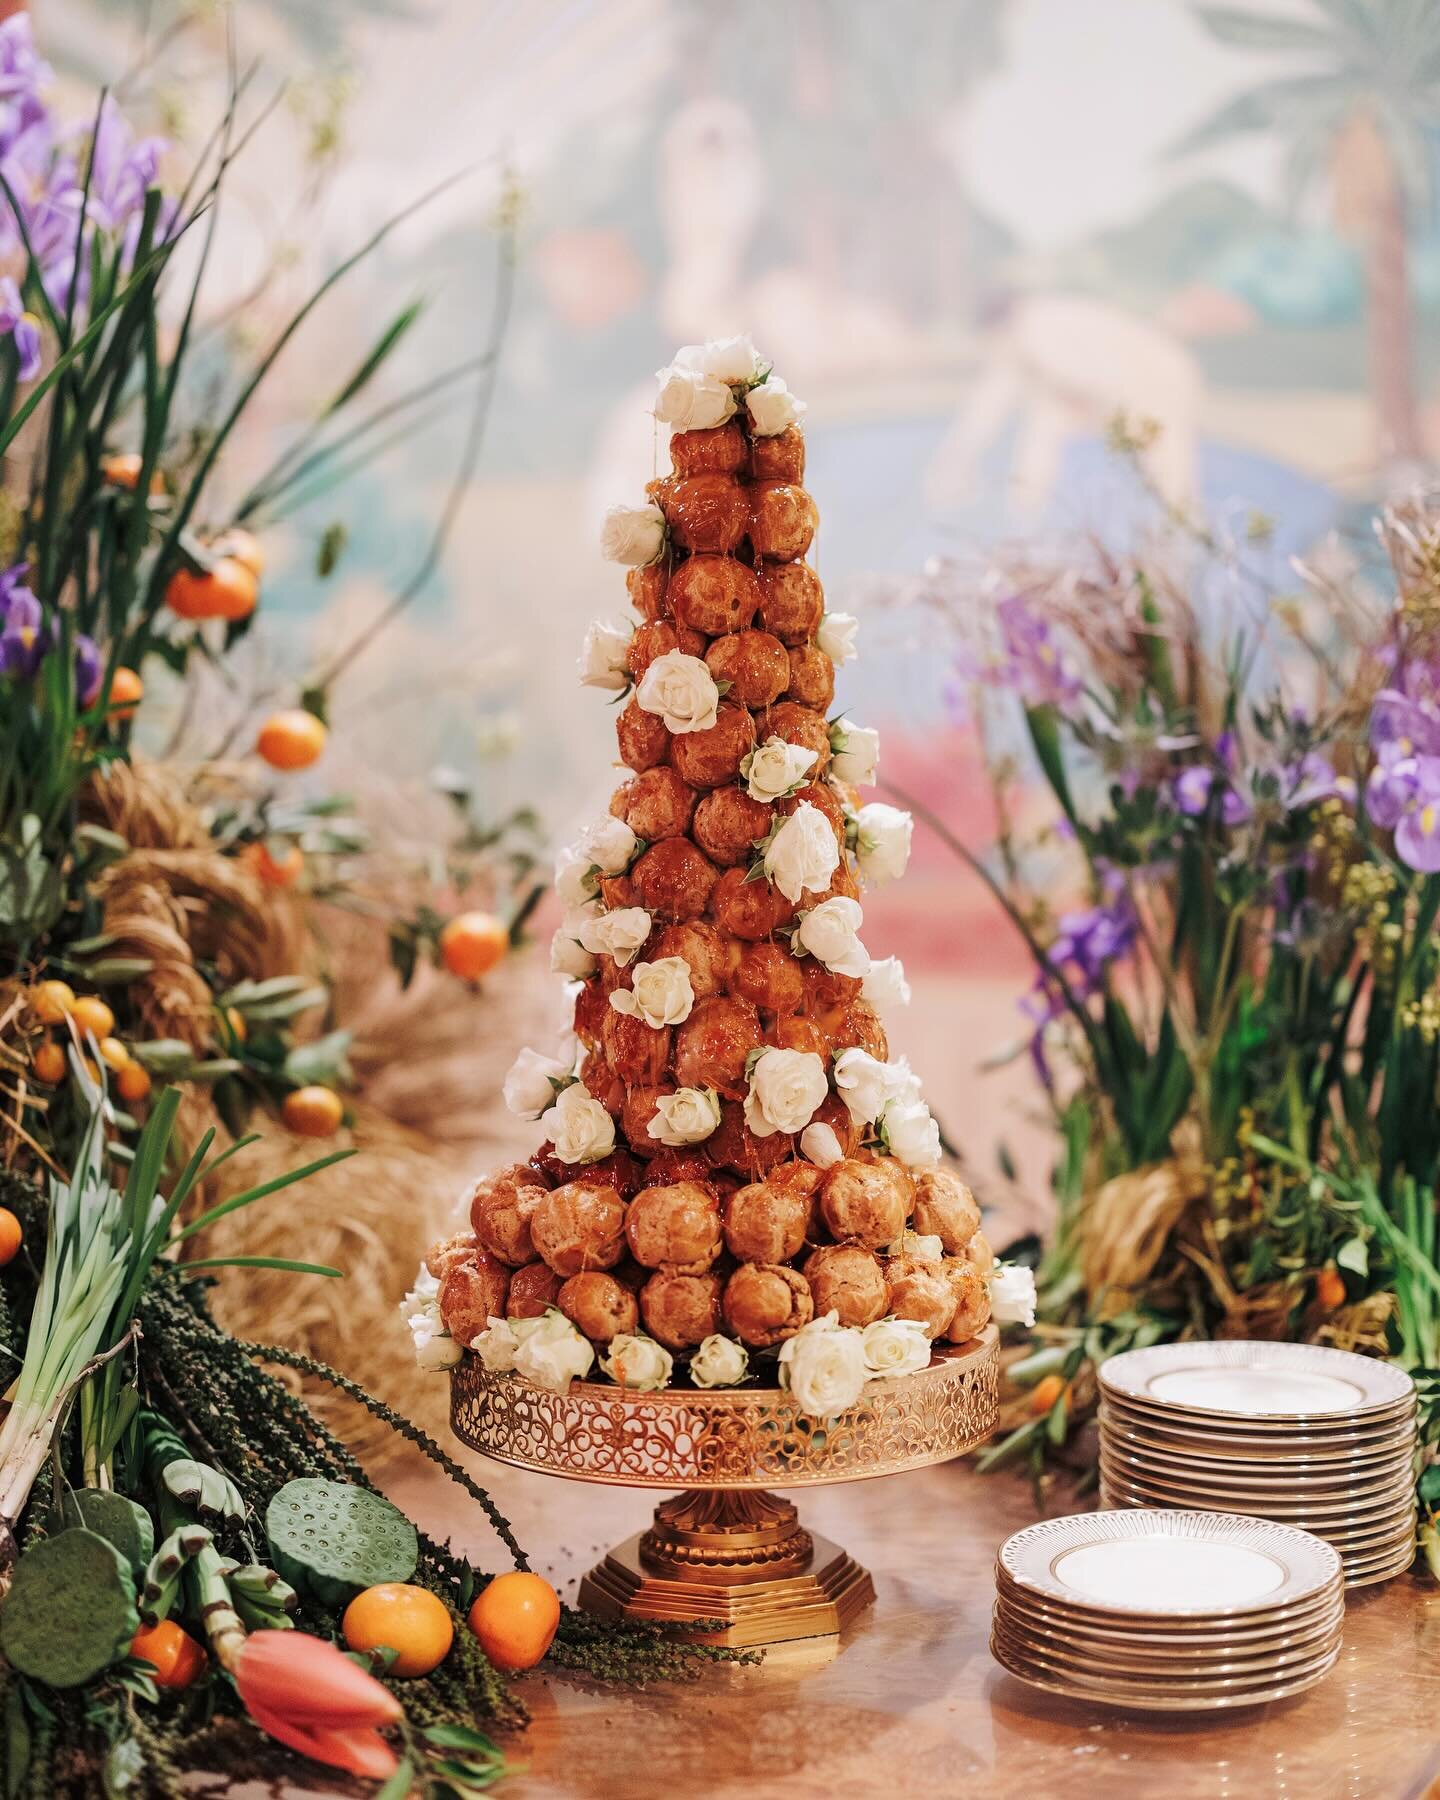 A &ldquo;meadow in the sky&rdquo; is how planner Jennifer Donaldson of @willowandbloomevents described Jordan and Hunter&rsquo;s magical, whimsical wedding. A mix of turn-of-the-century art nouveau romance, wild and inspired botanicals by @jeanpascal